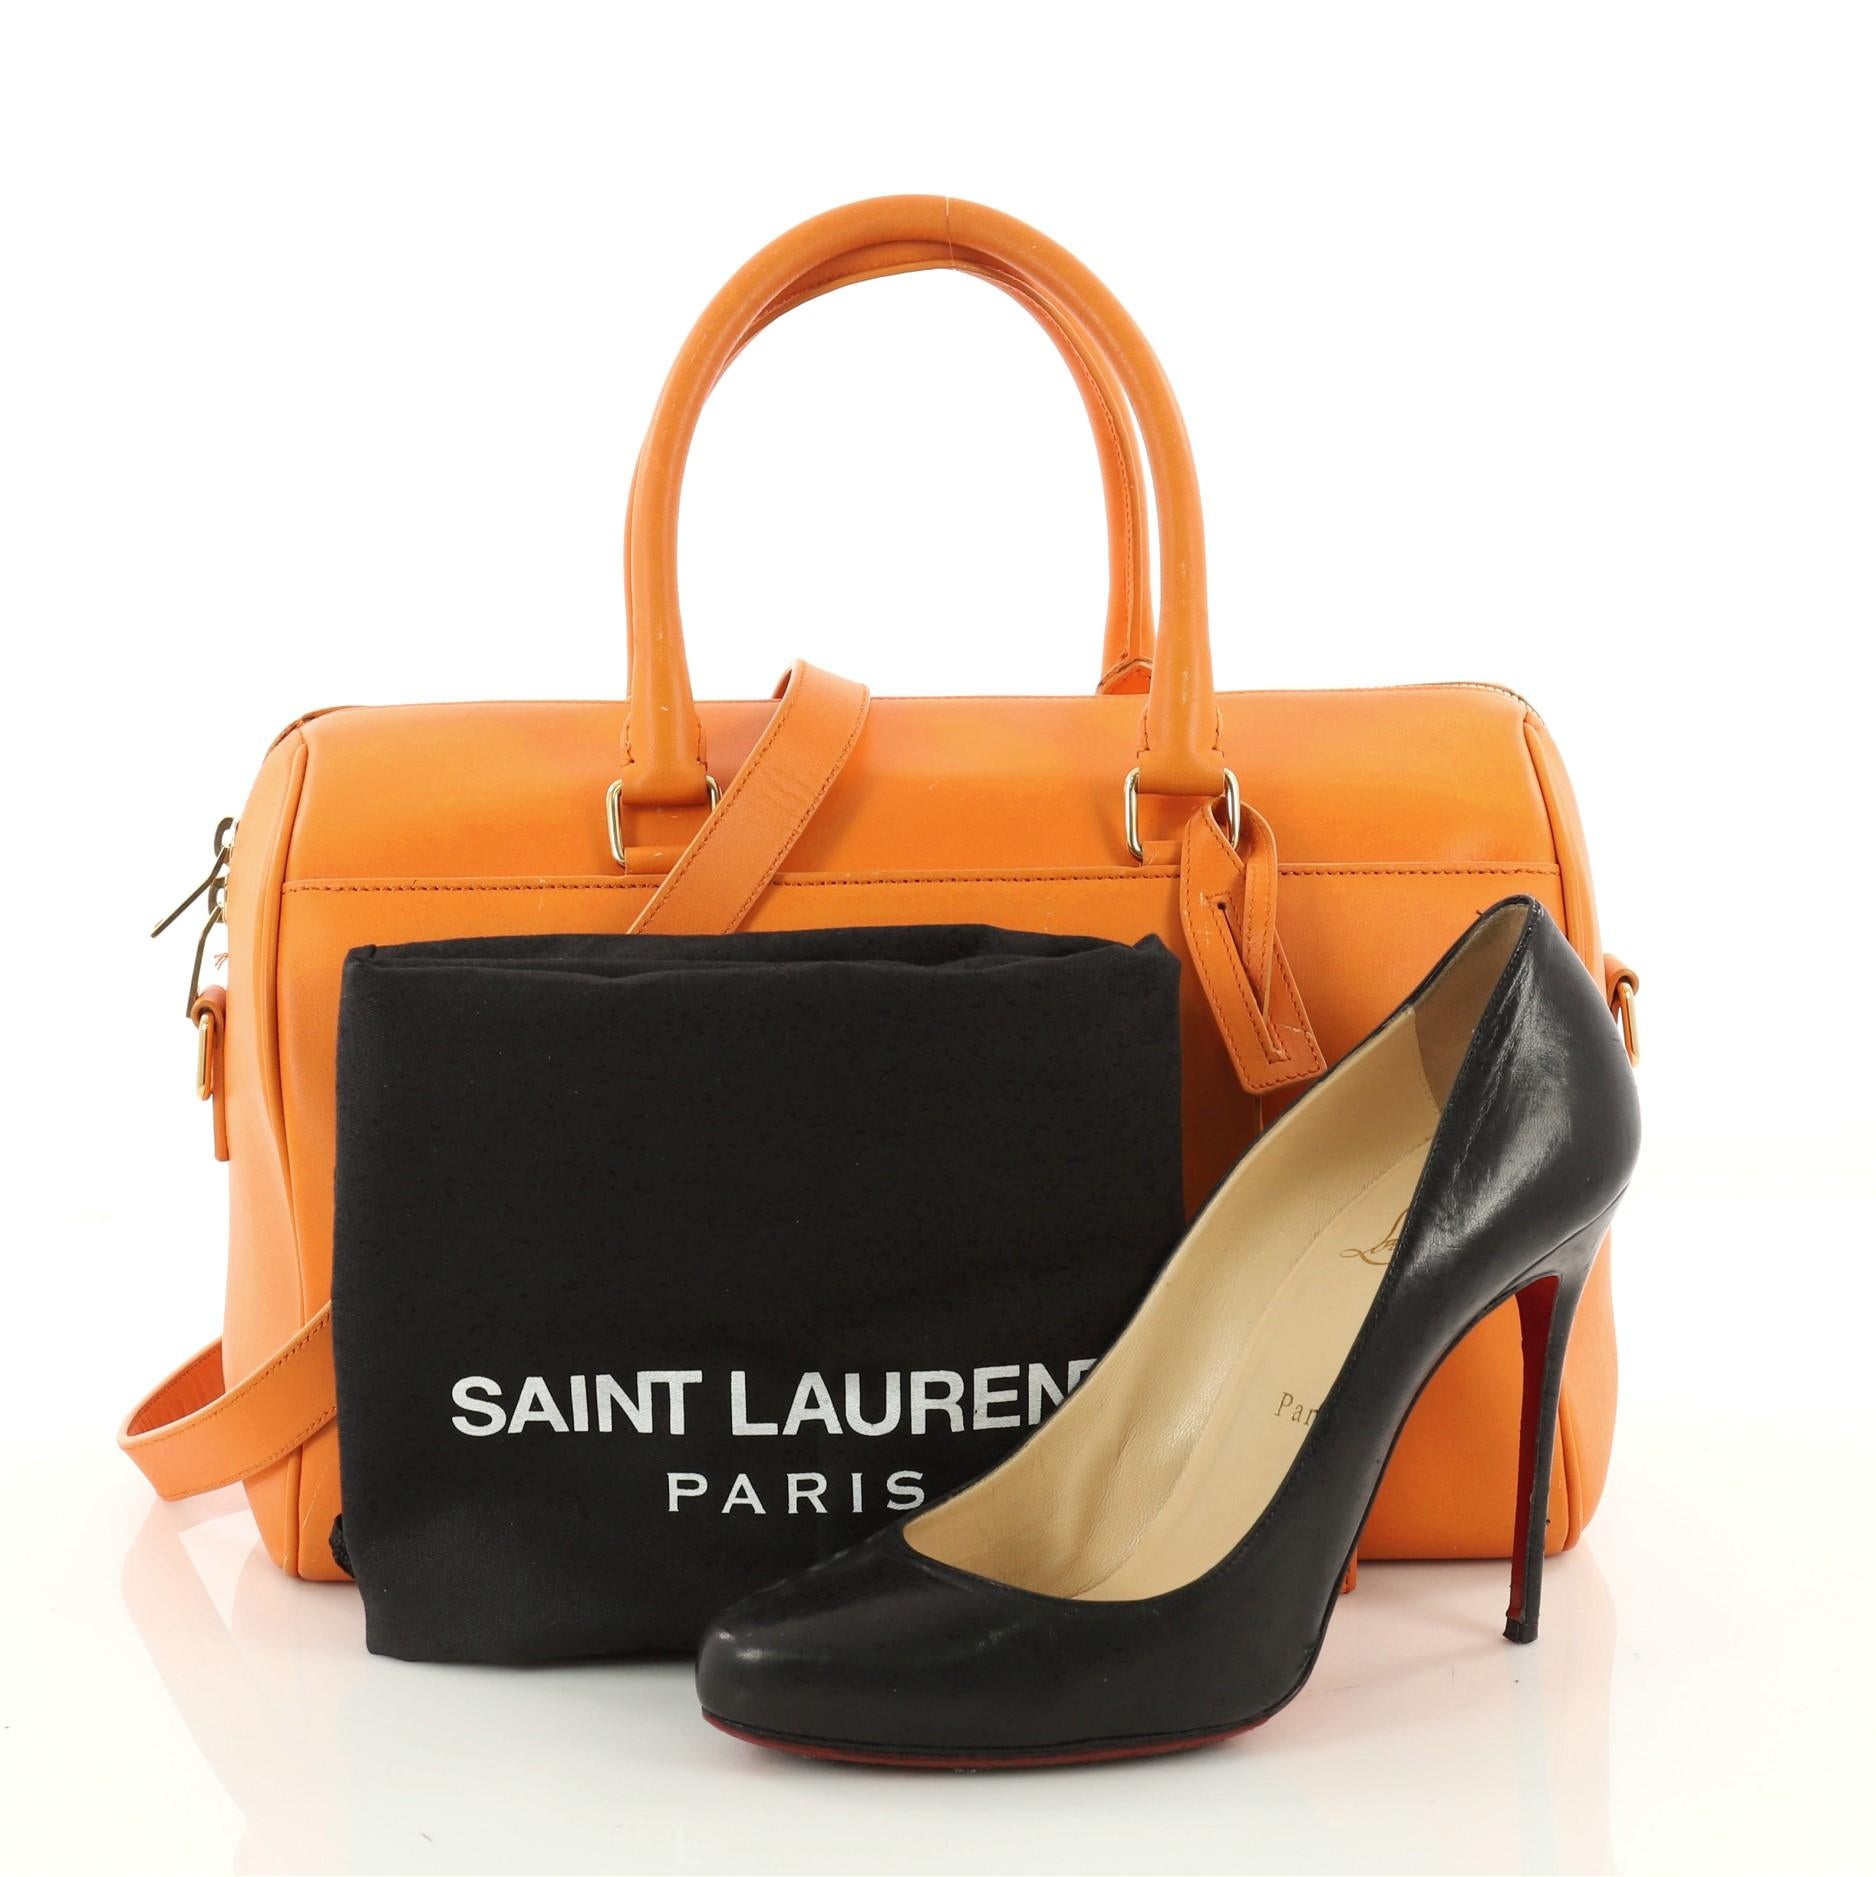 This authentic Saint Laurent Classic Duffle Bag Leather 12 is a sleek miniature bag. Crafted from orange leather, this petite duffle features dual-rolled handles, Saint Laurent logo in gold writing, protective base studs, and gold-tone hardware